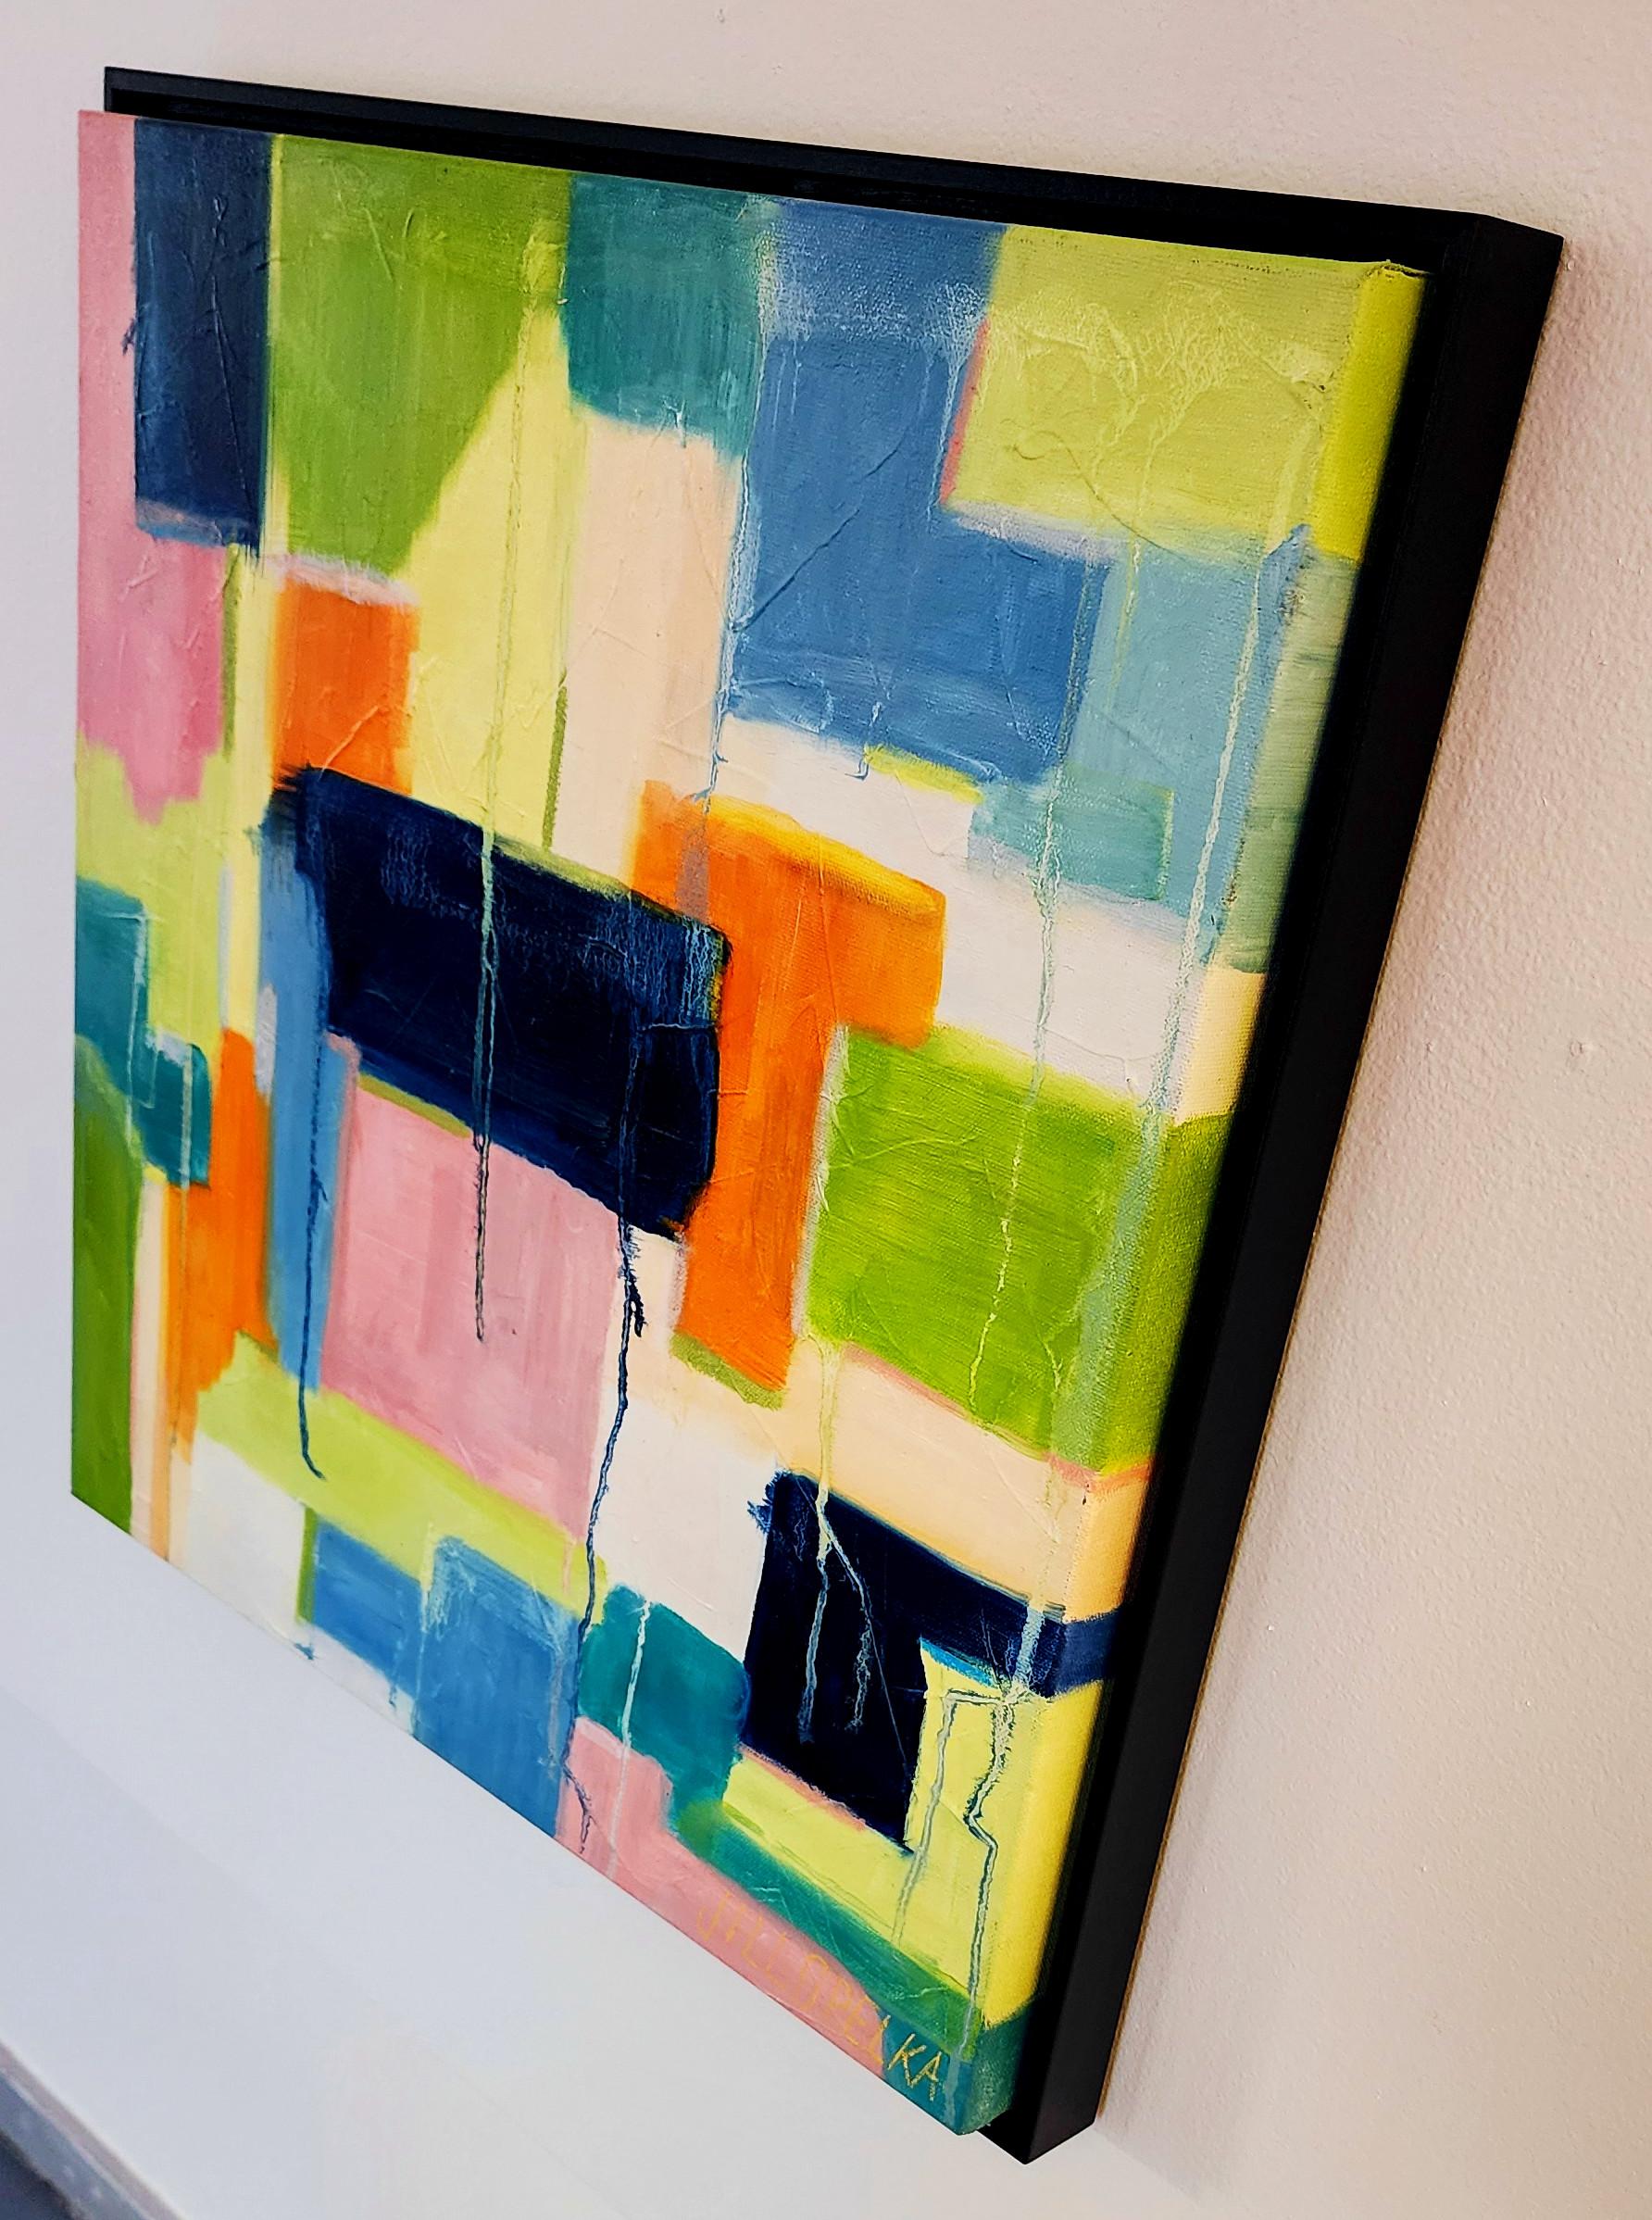 Jill Opelka
Abstract III
Oil on Canvas
Year: 2023
Size: 20x20in
Framed: 21x21x1.5in
Signed by hand
COA provided
Ref.: 924802-2050

Tags: Abstract, Vibrant, Deep, Blue, Navy, Green, Orange, Pink

*Framed in a black wooden